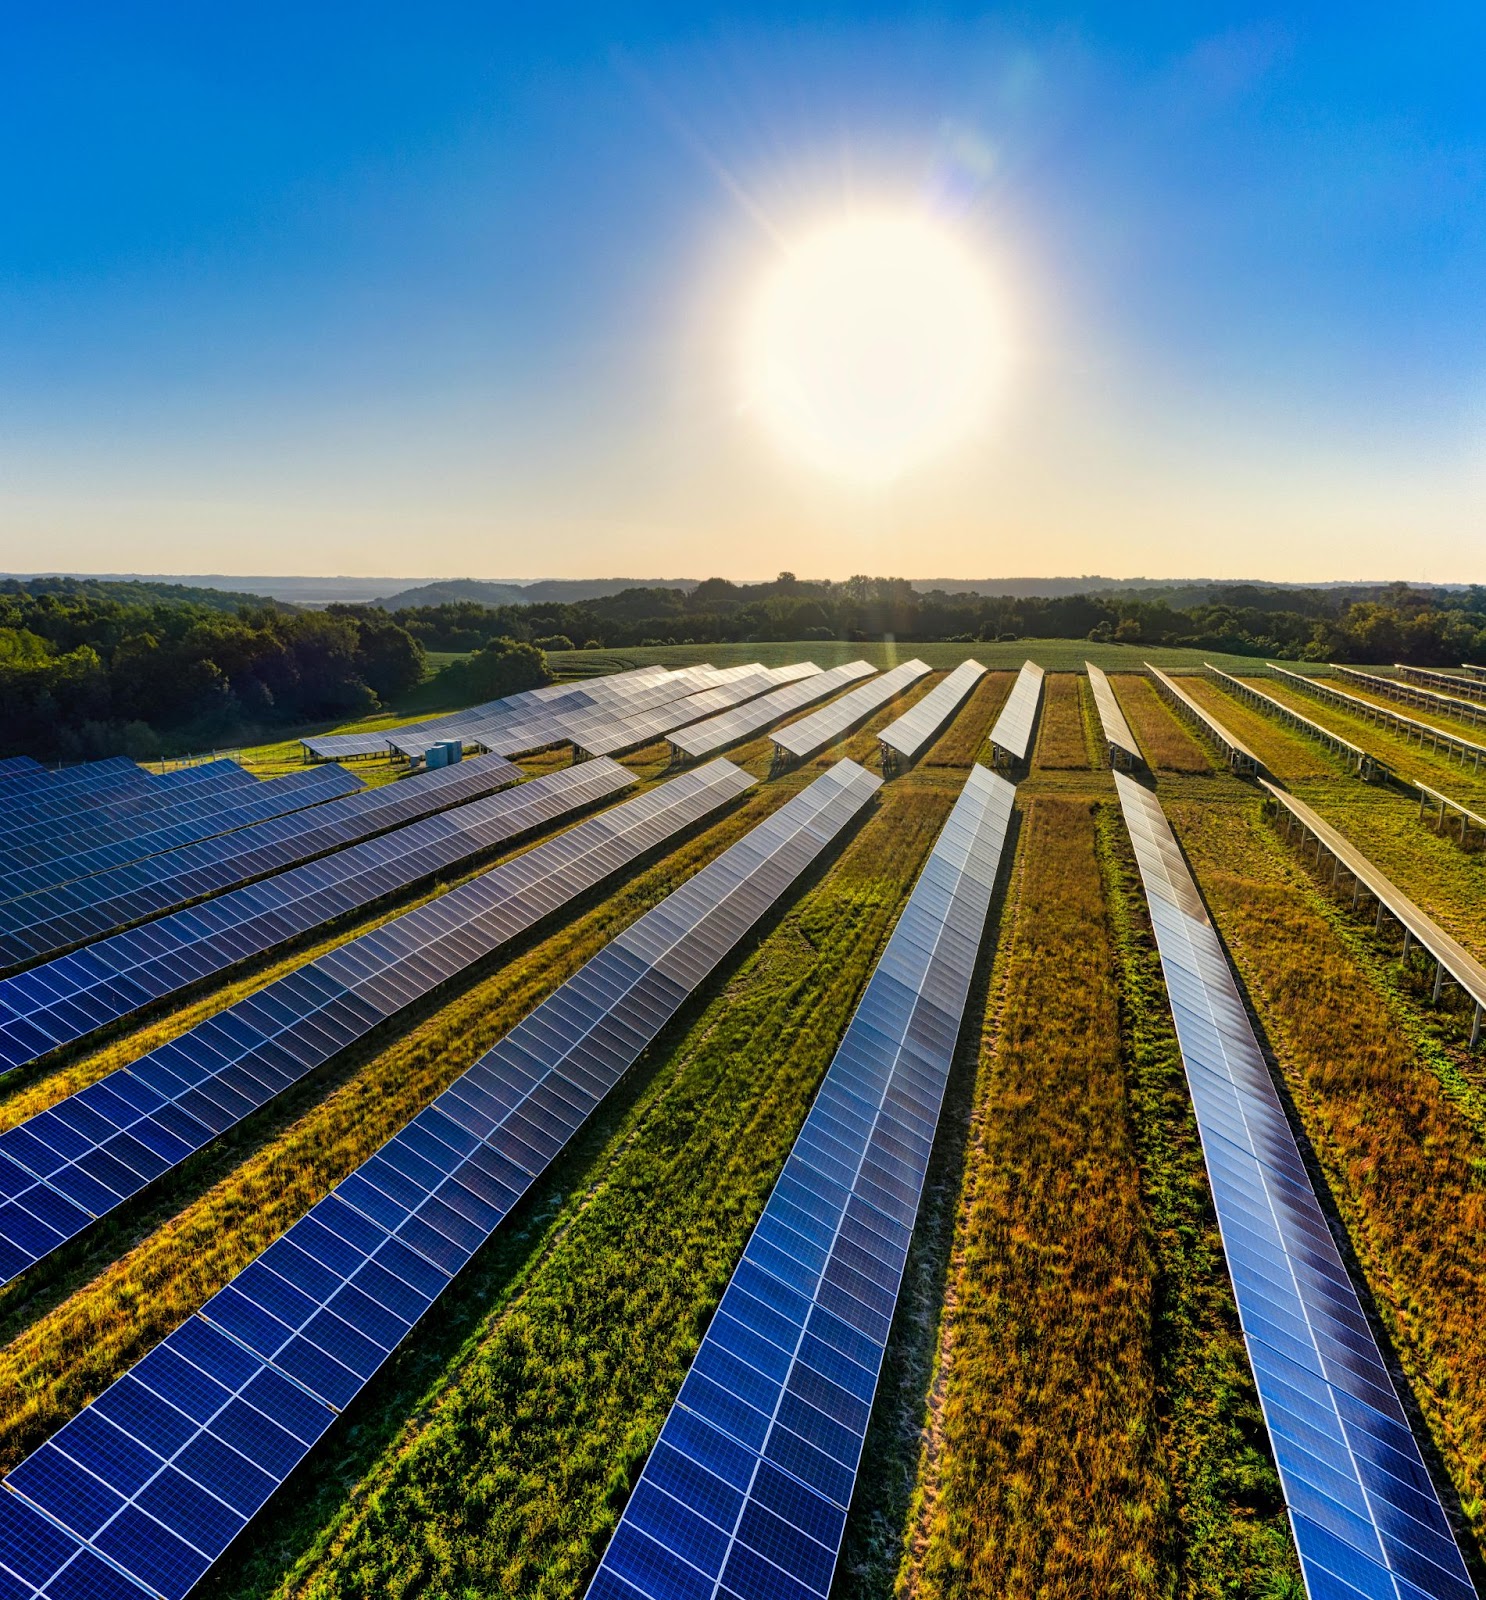 Solar panels in a field with bright sun in the sky